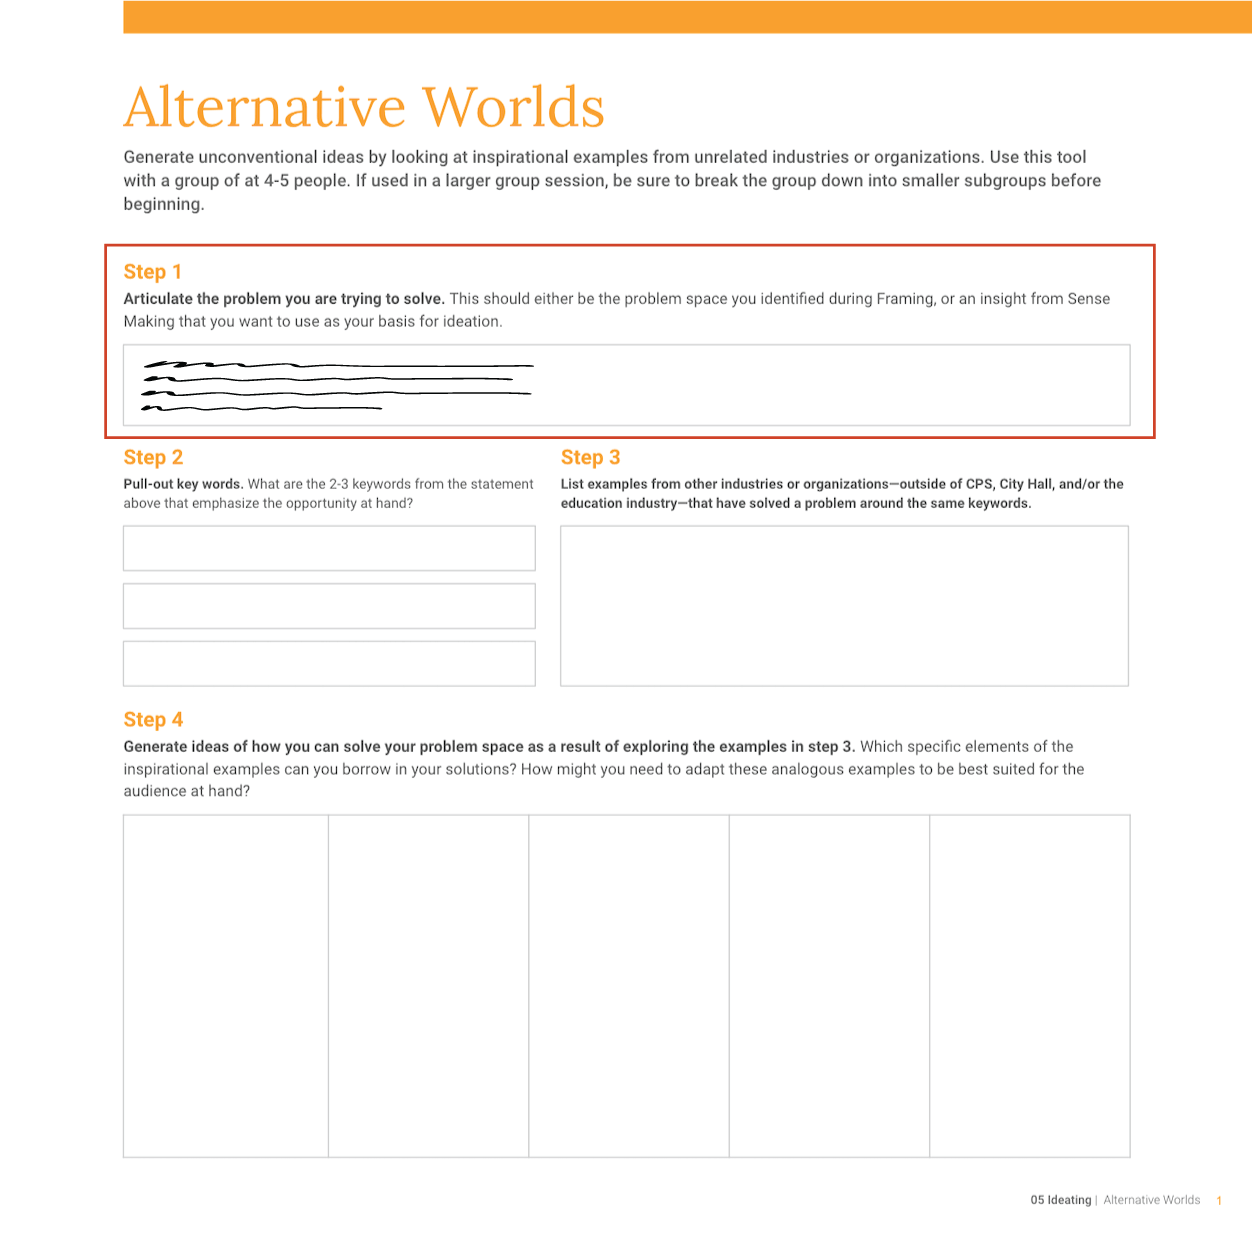 Image of Alternative Worlds worksheet with part one filled in